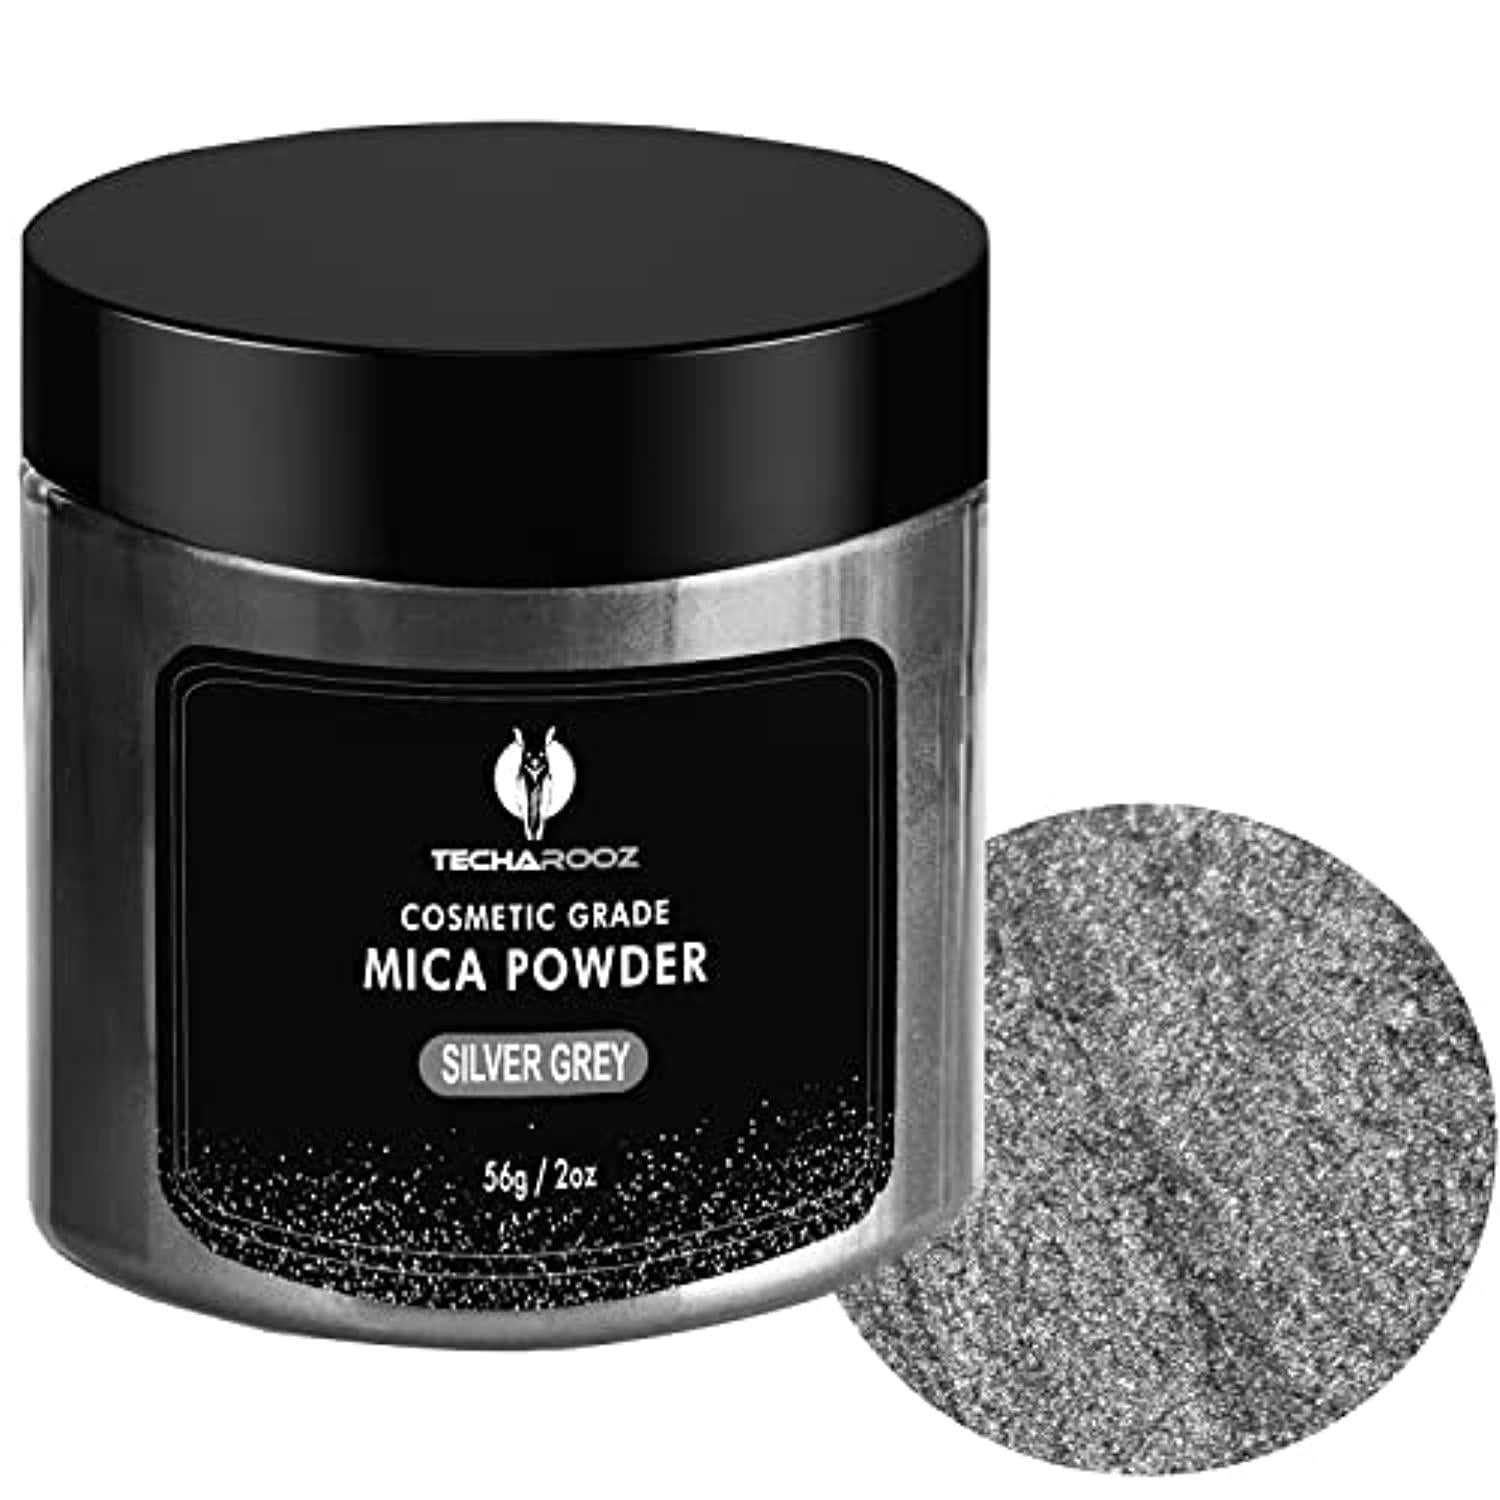 Sliver Black Mica Powder for Epoxy Resin 3.5 oz /100g Powdered Pigment for Soap Colorant Bath Bomb Dye, Cosmetic Grade for Lip Gloss, Acrylic Nails